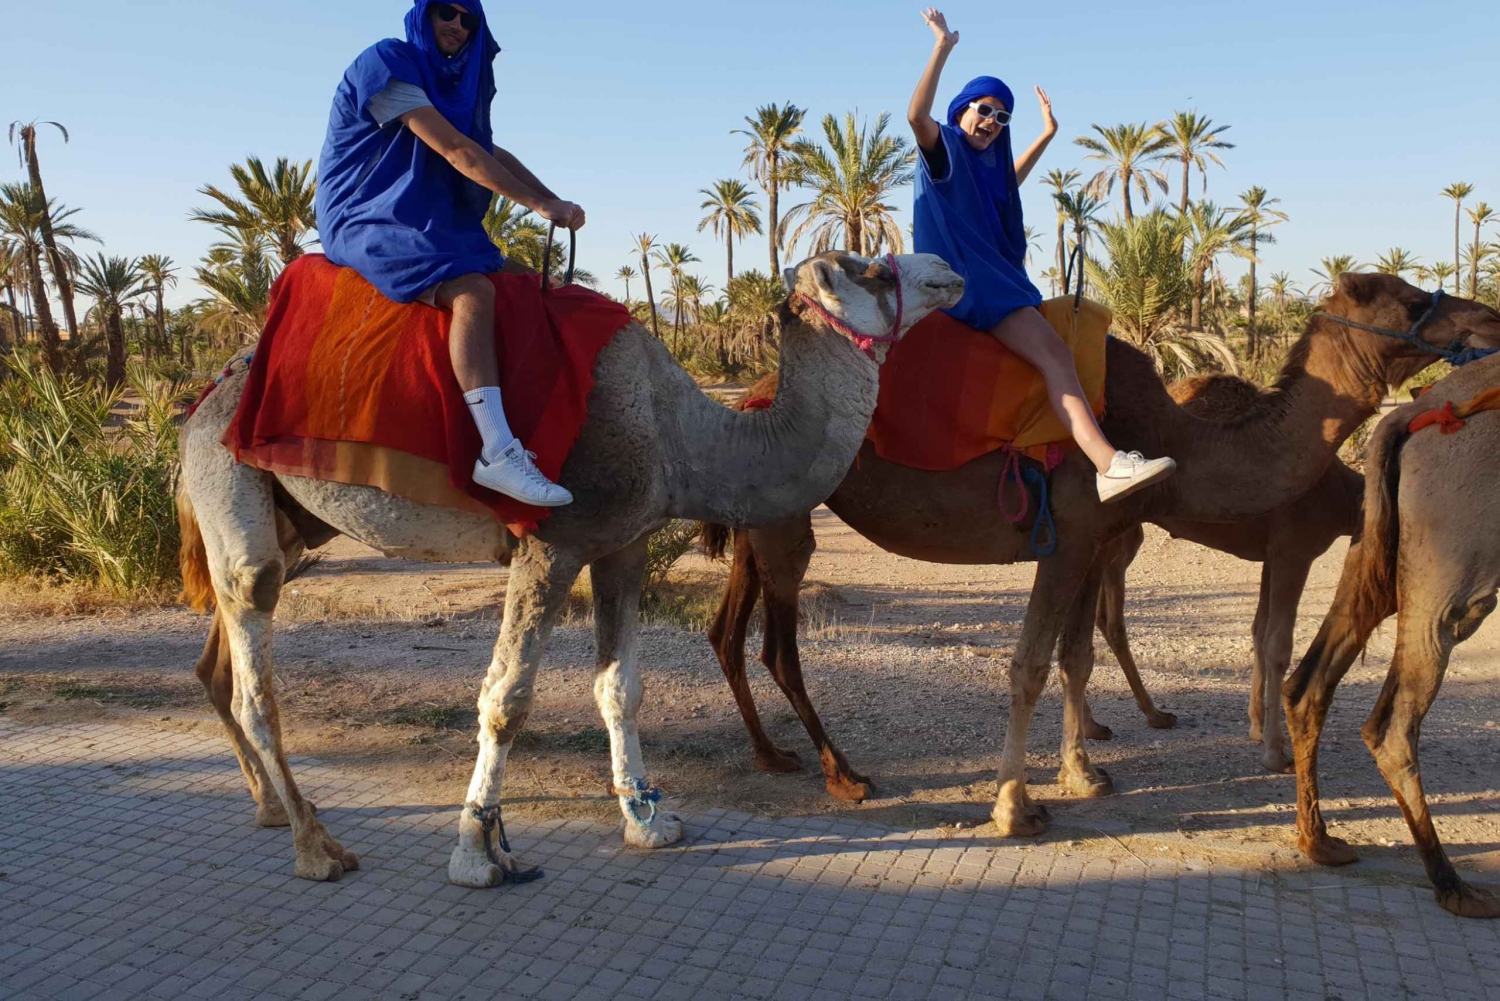 Sunset Camel Ride in the Marrakech Palmeraie